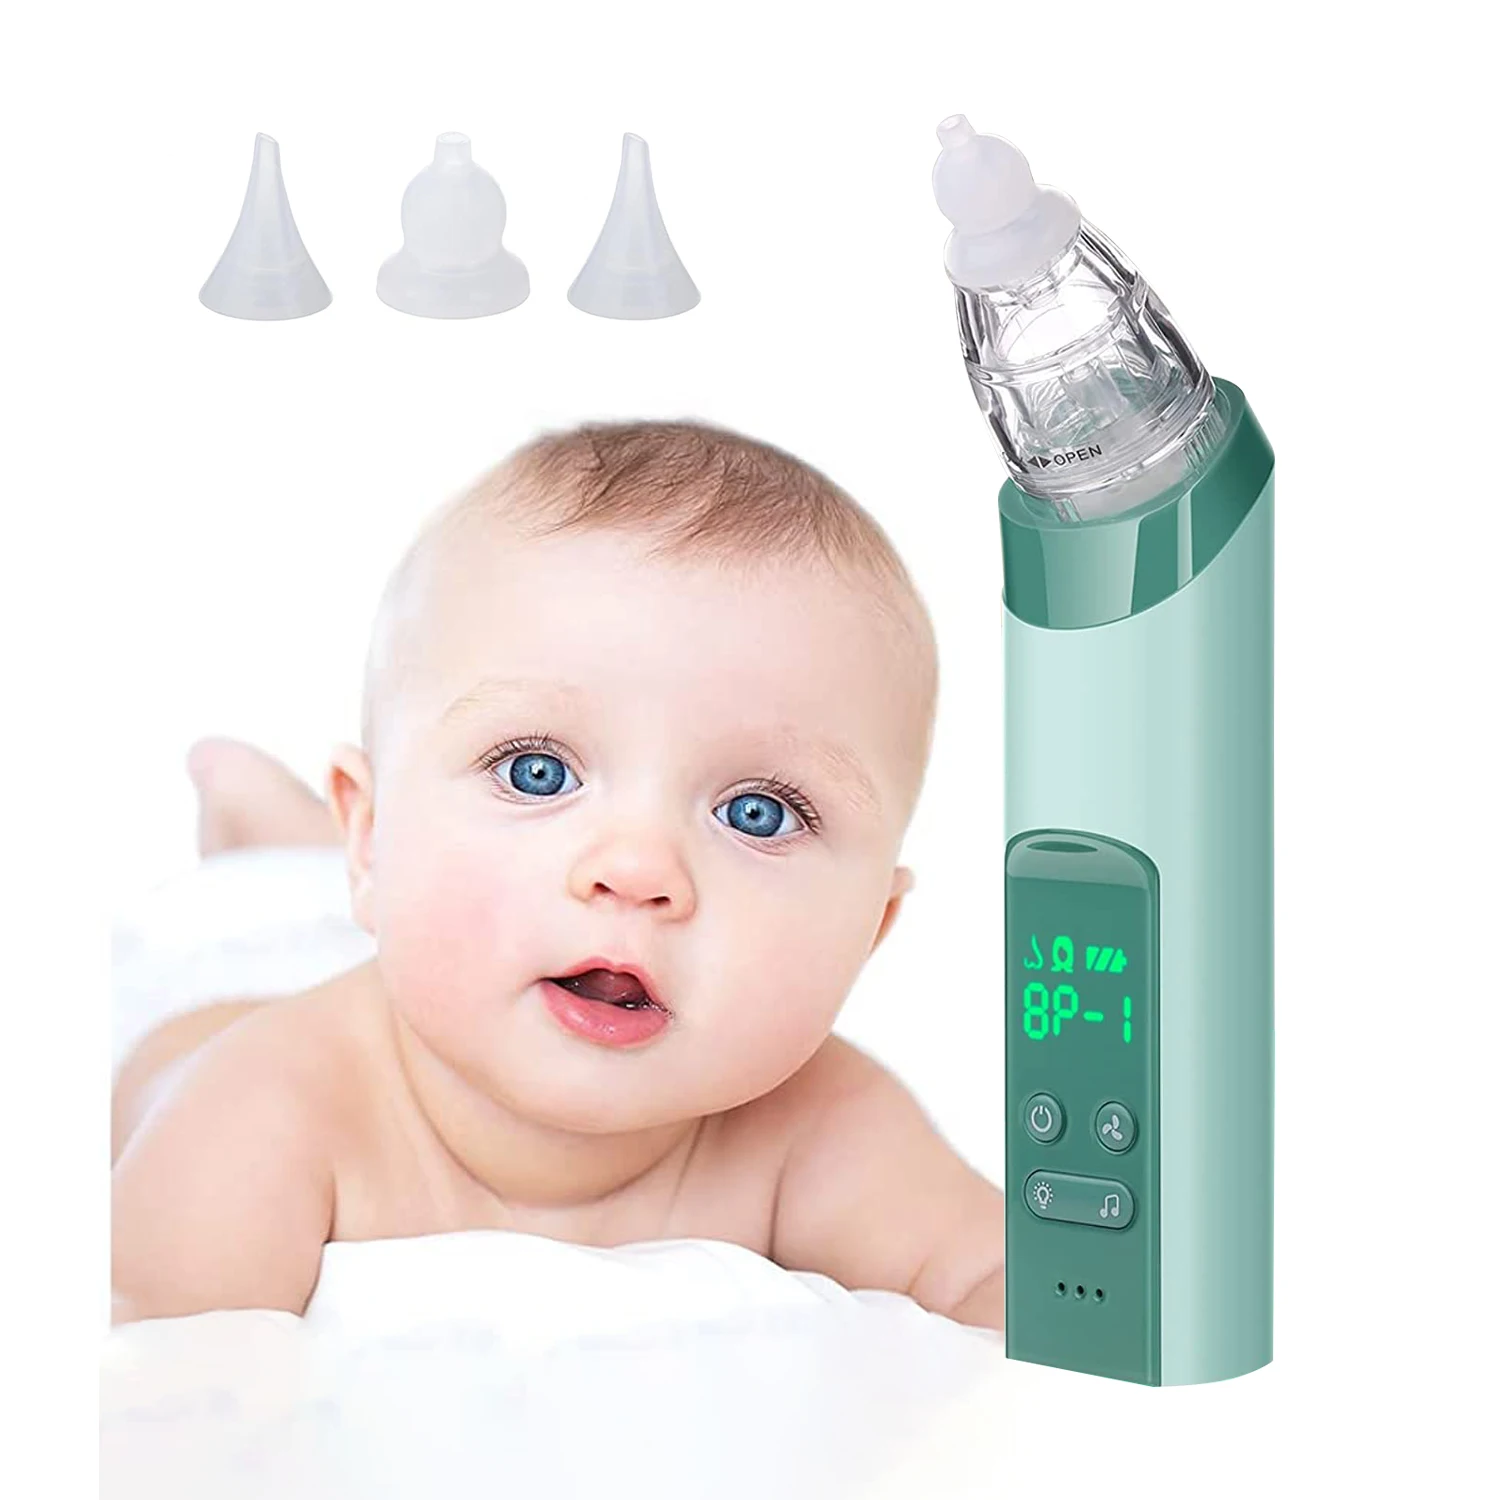 

Newborn Safe Electric Vacuum Mucus Neonatal Infant Bebe Baby Nose Cleaner Silicone Nasal Aspirator Nose Cleaner With Light, Gray/green